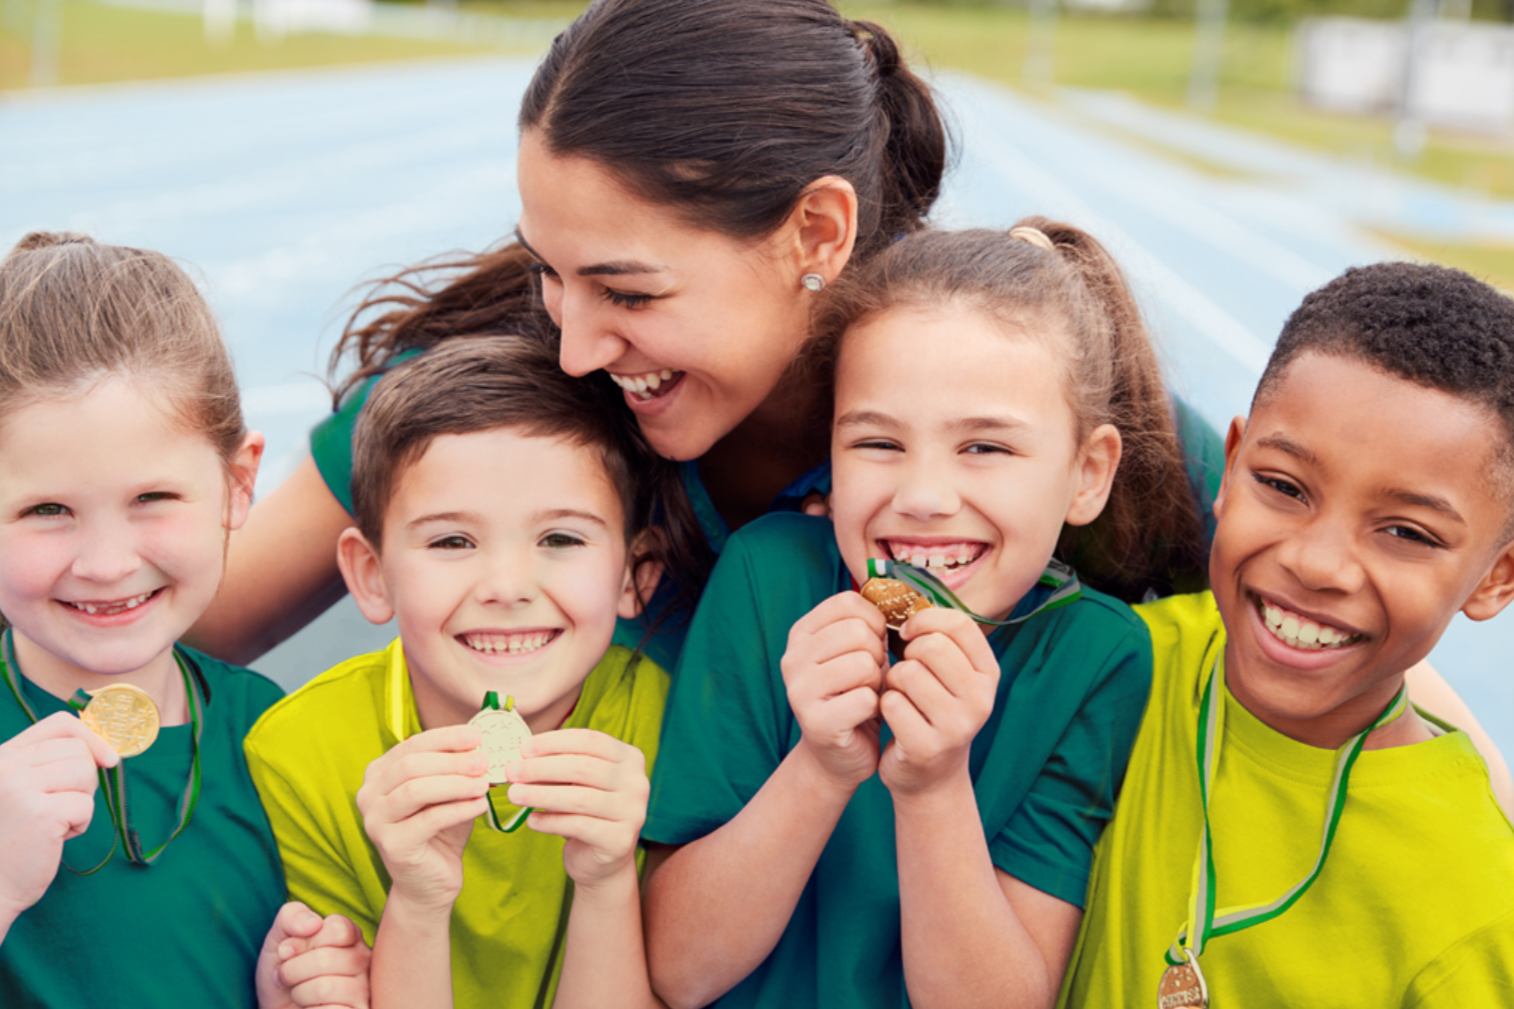 Four children dressed in green and gold holding medals with a coach